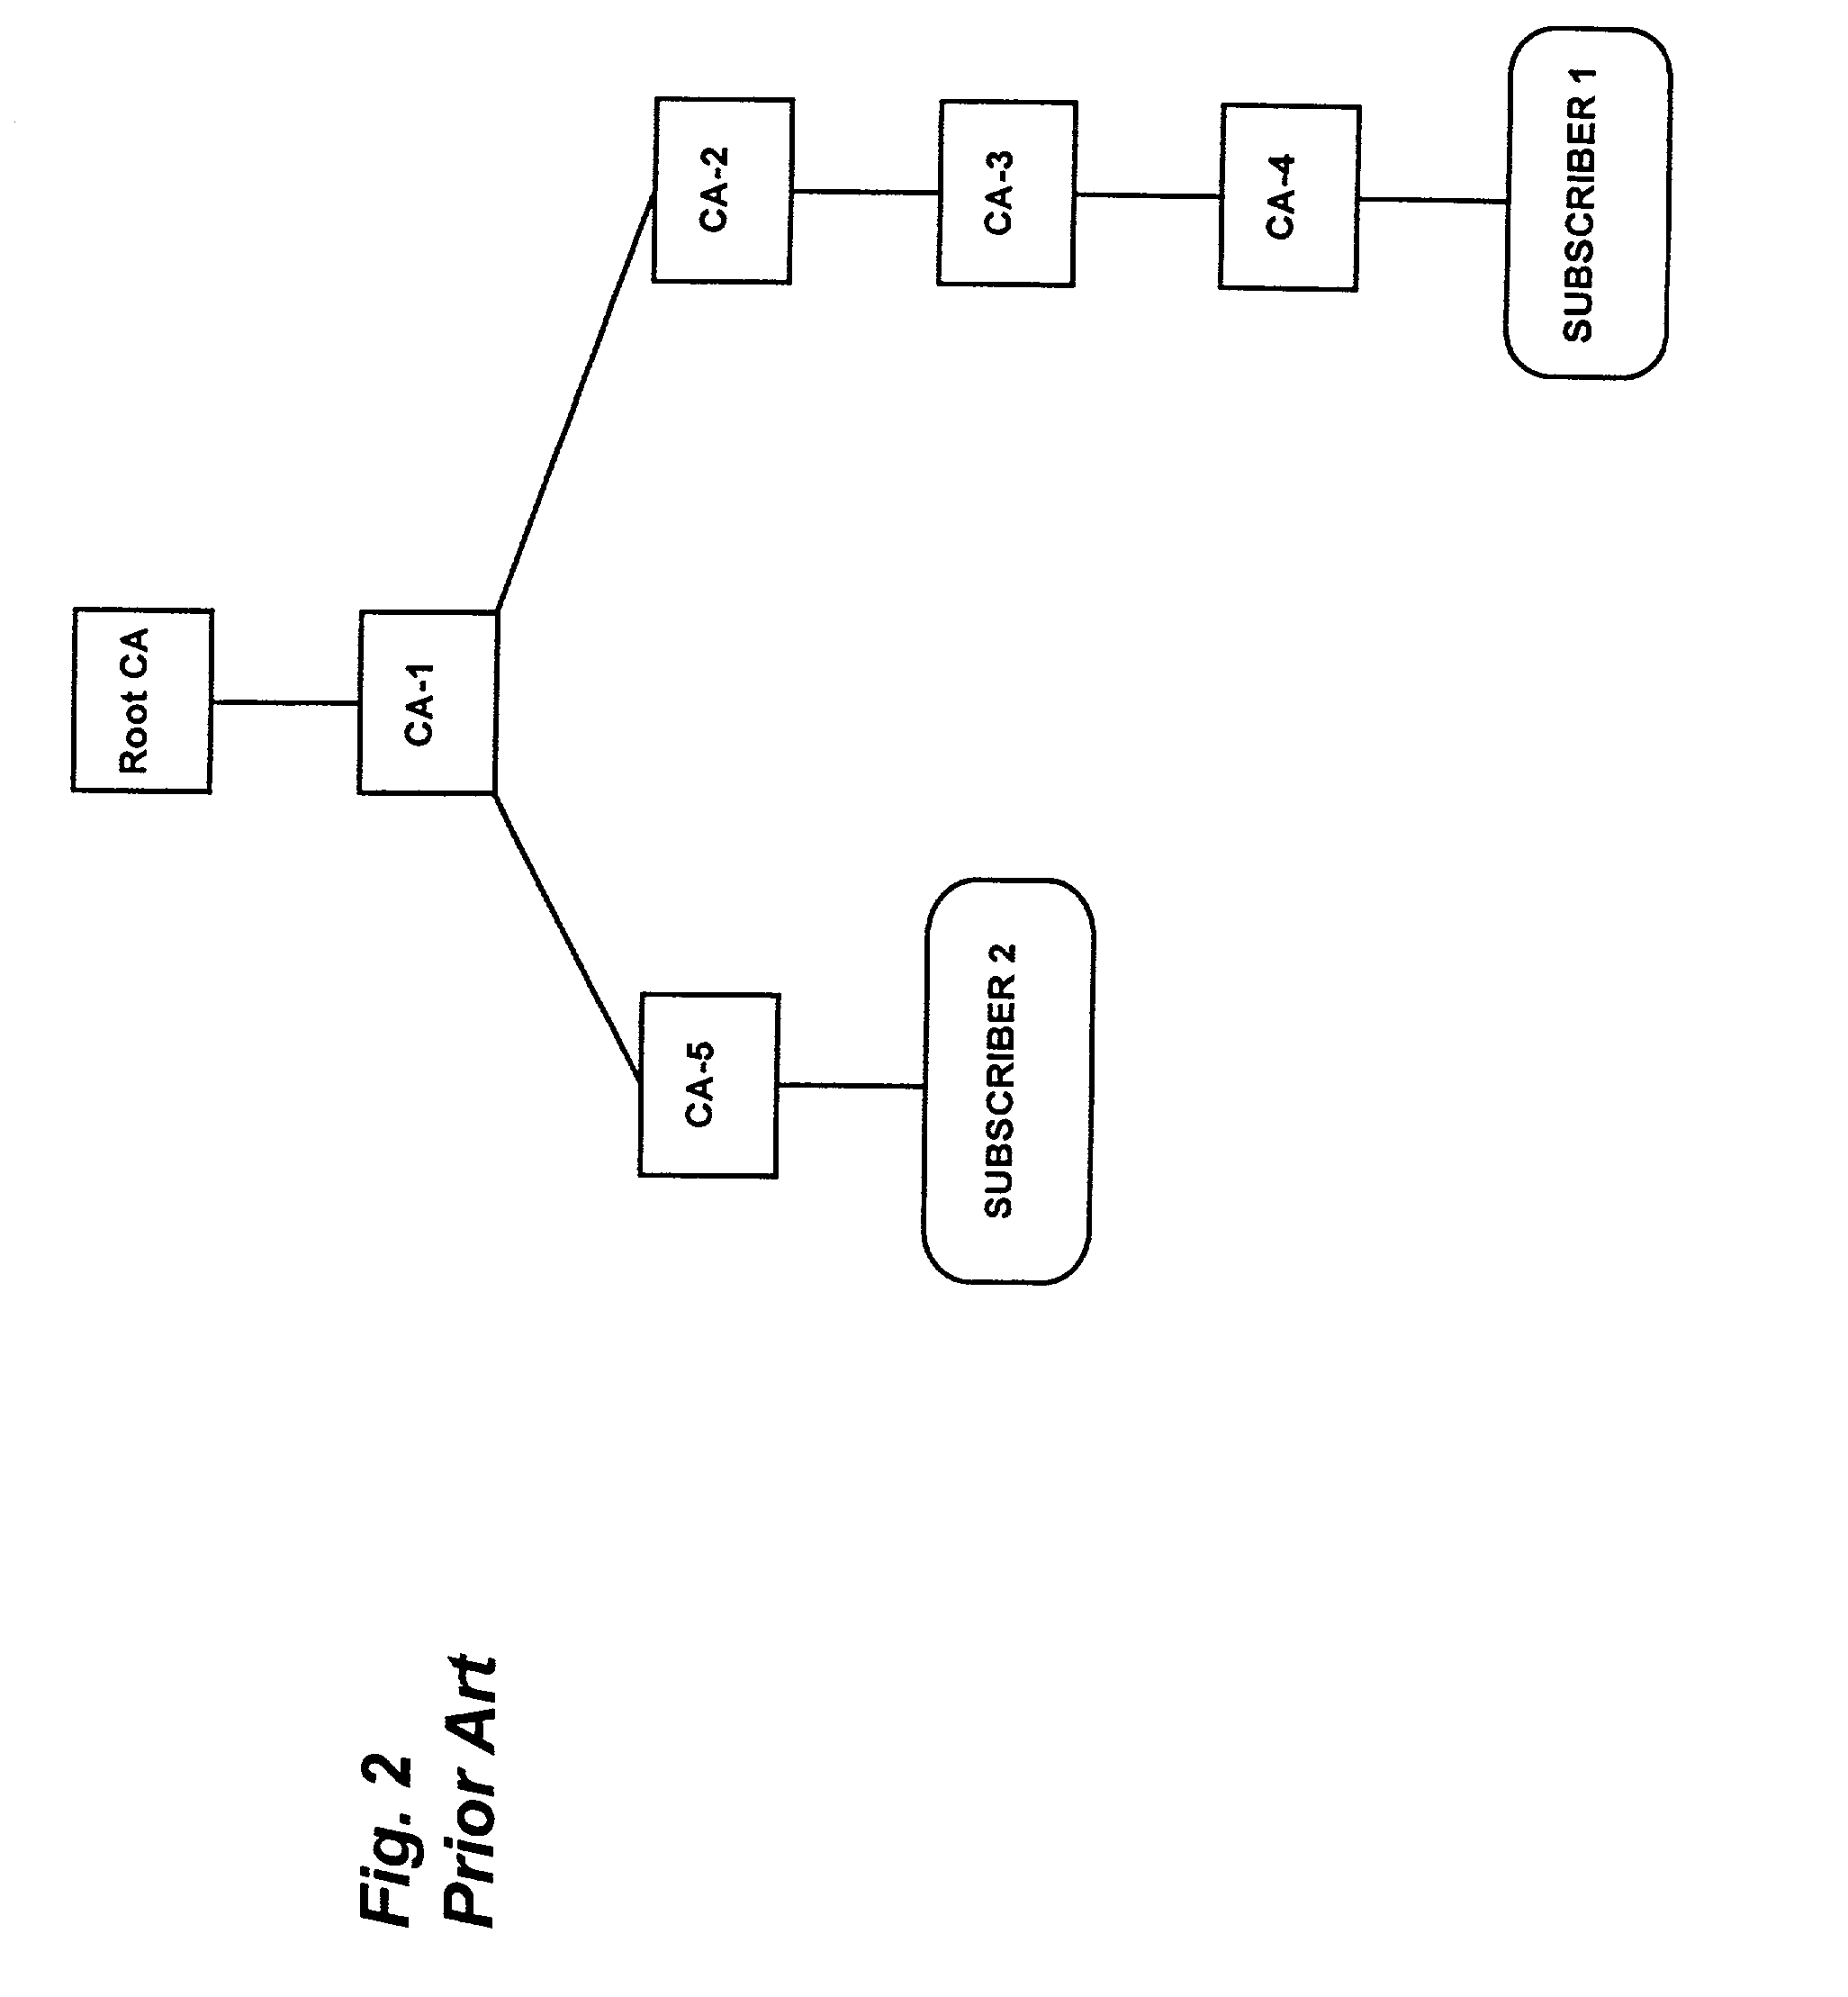 Reliance server for electronic transaction system